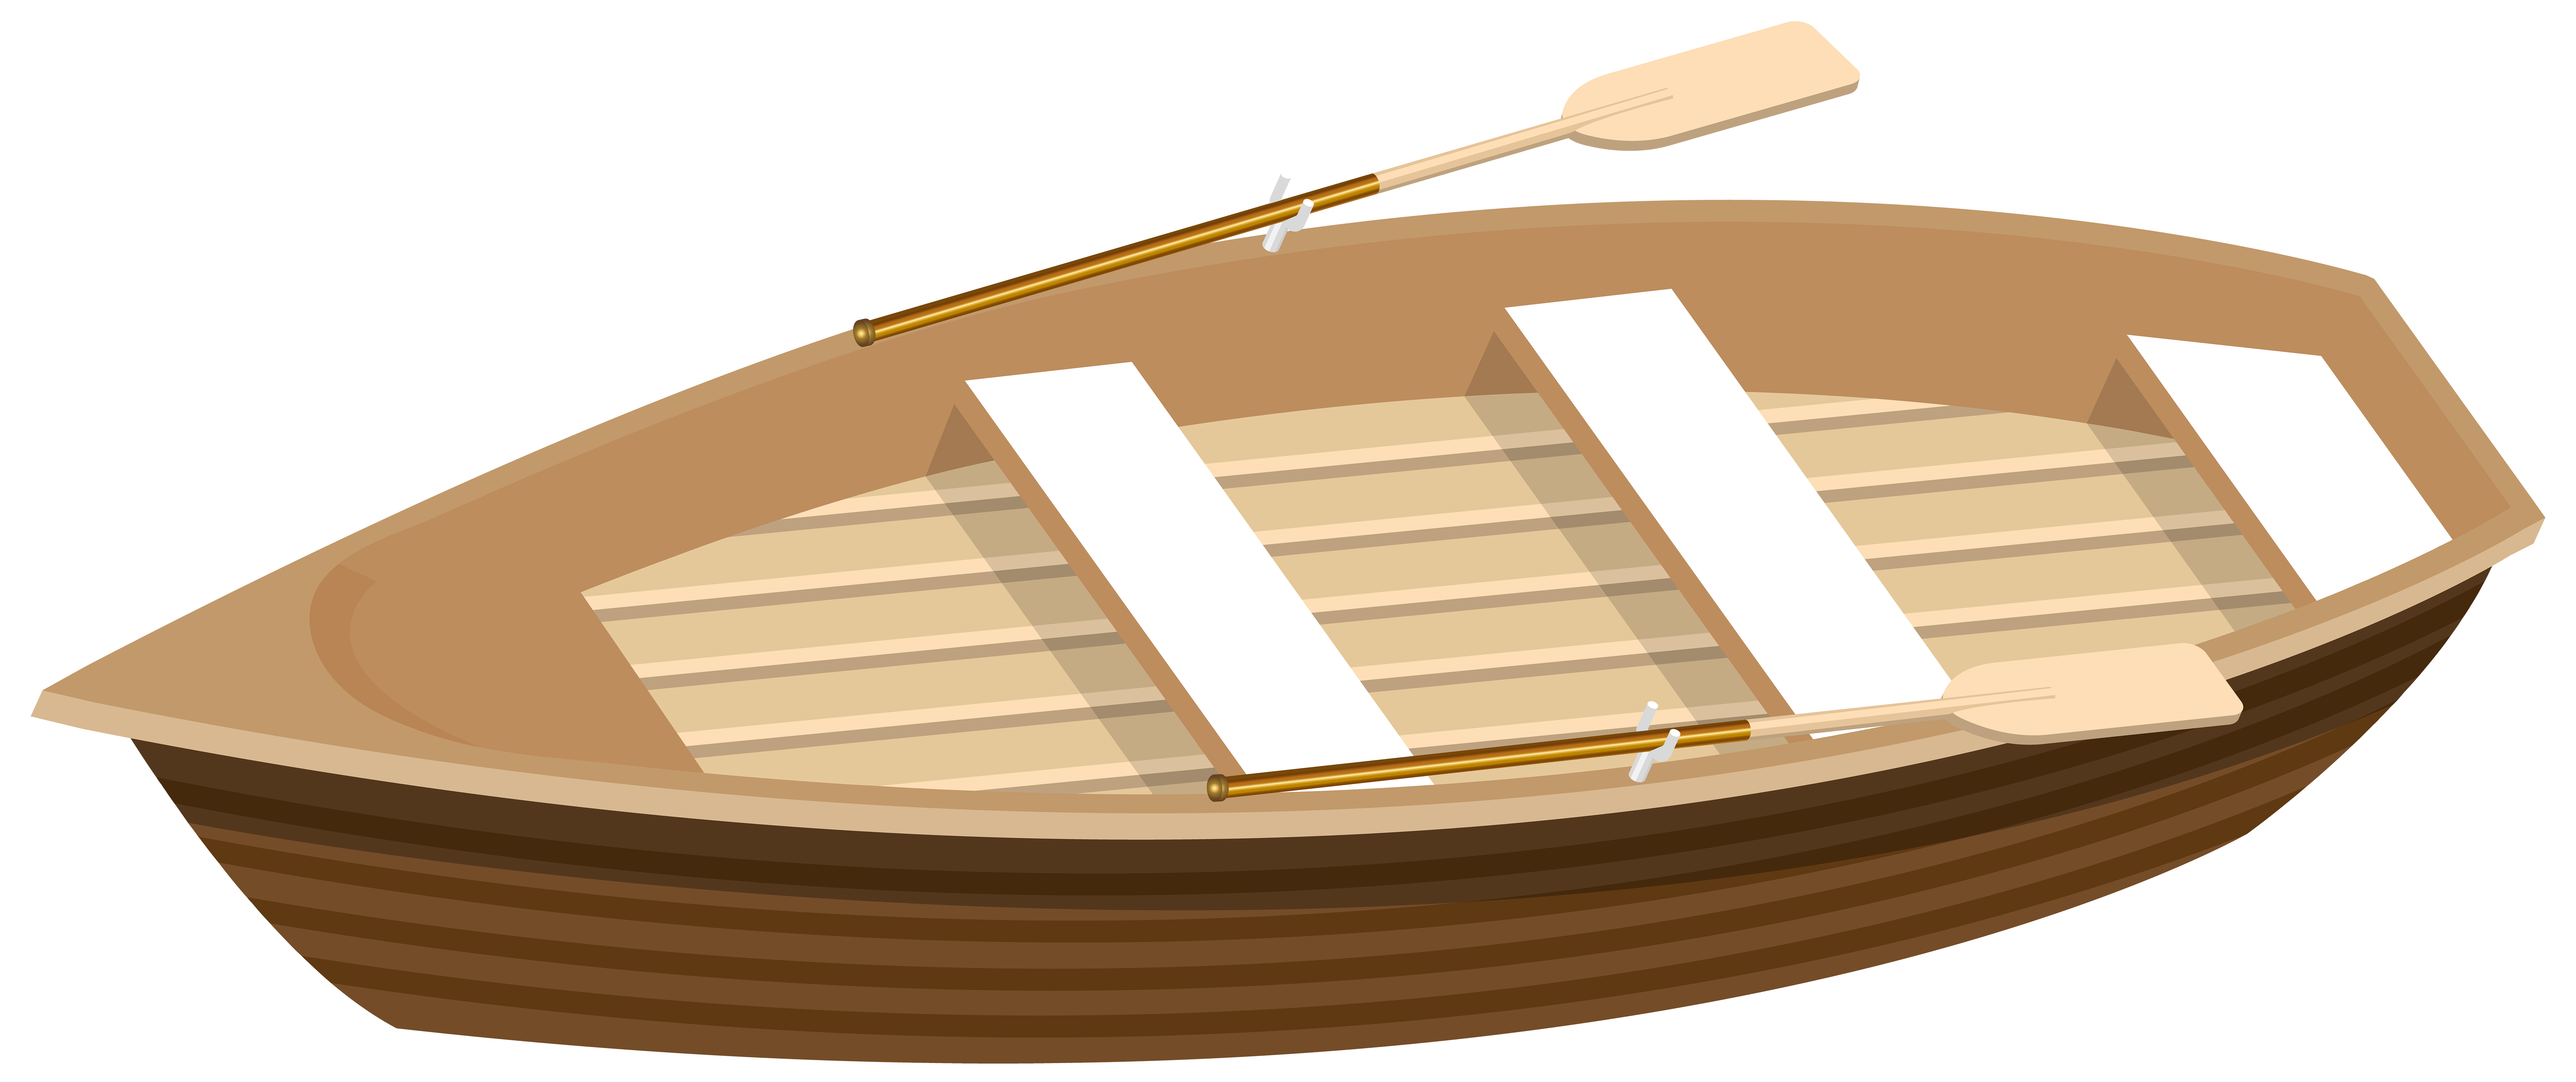 Boat Transparent Clipart, Speed, Fishing, Yacht Boat PNG Images - Free